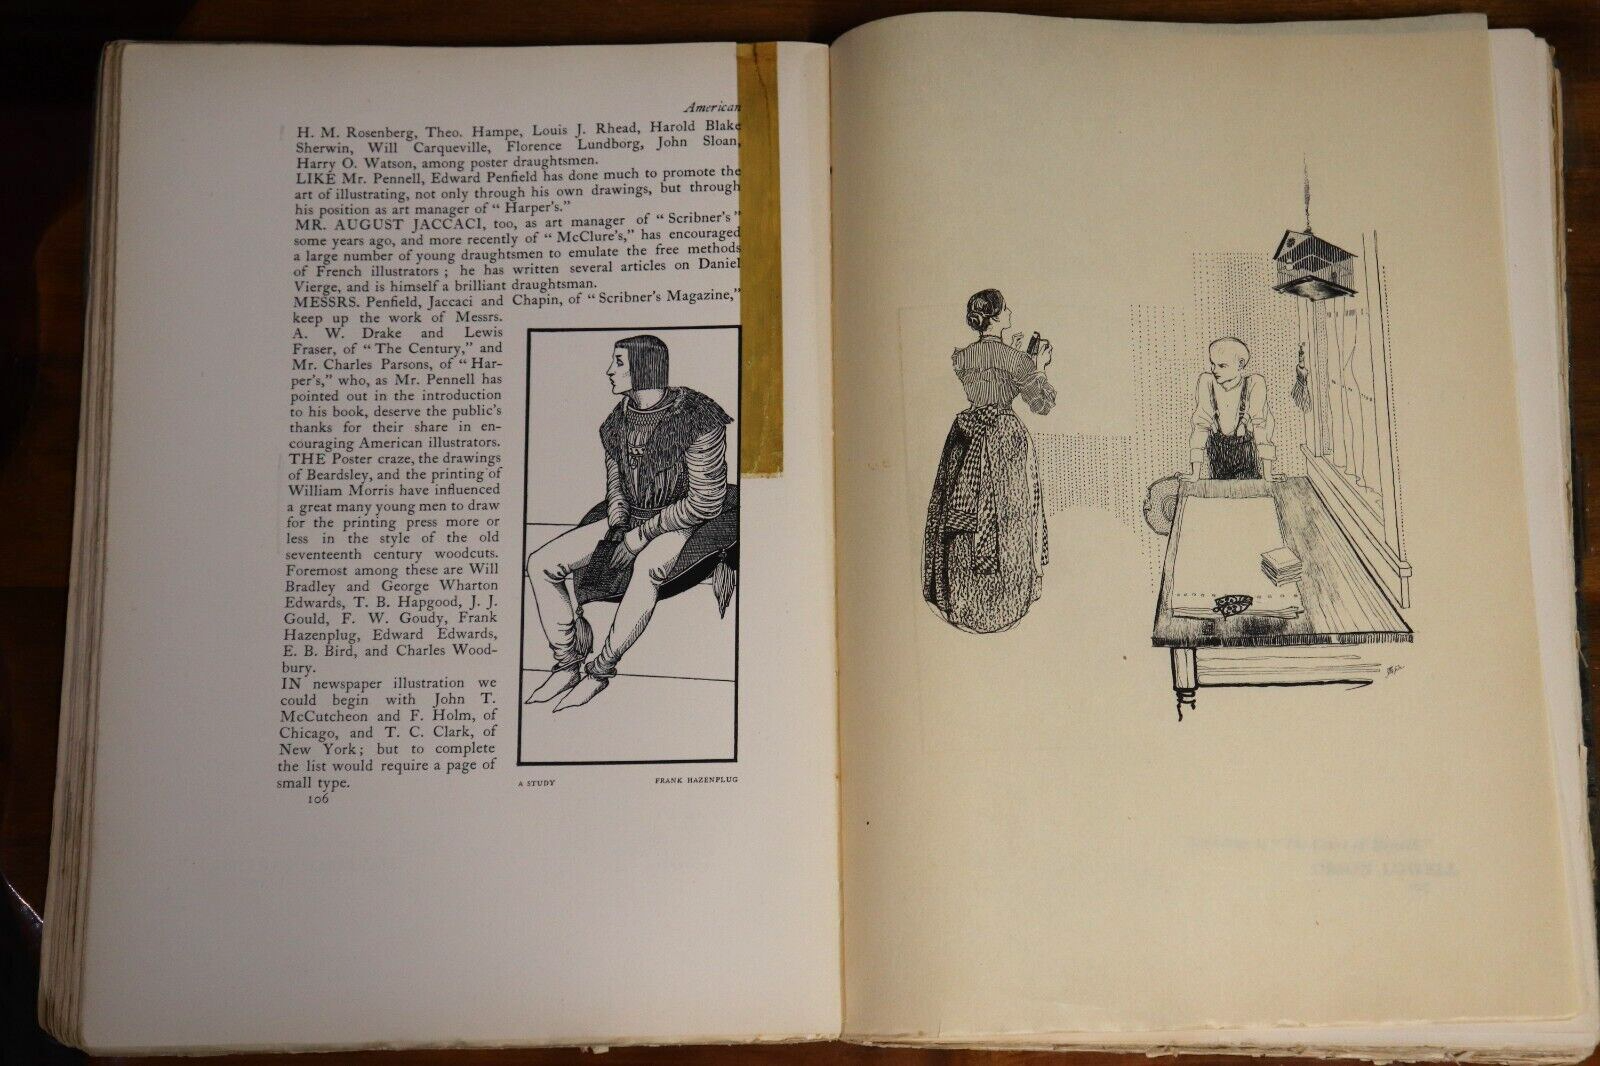 1901 The Studio: Modern Pen Drawings Antiquarian Art Magazine by Charles Holme